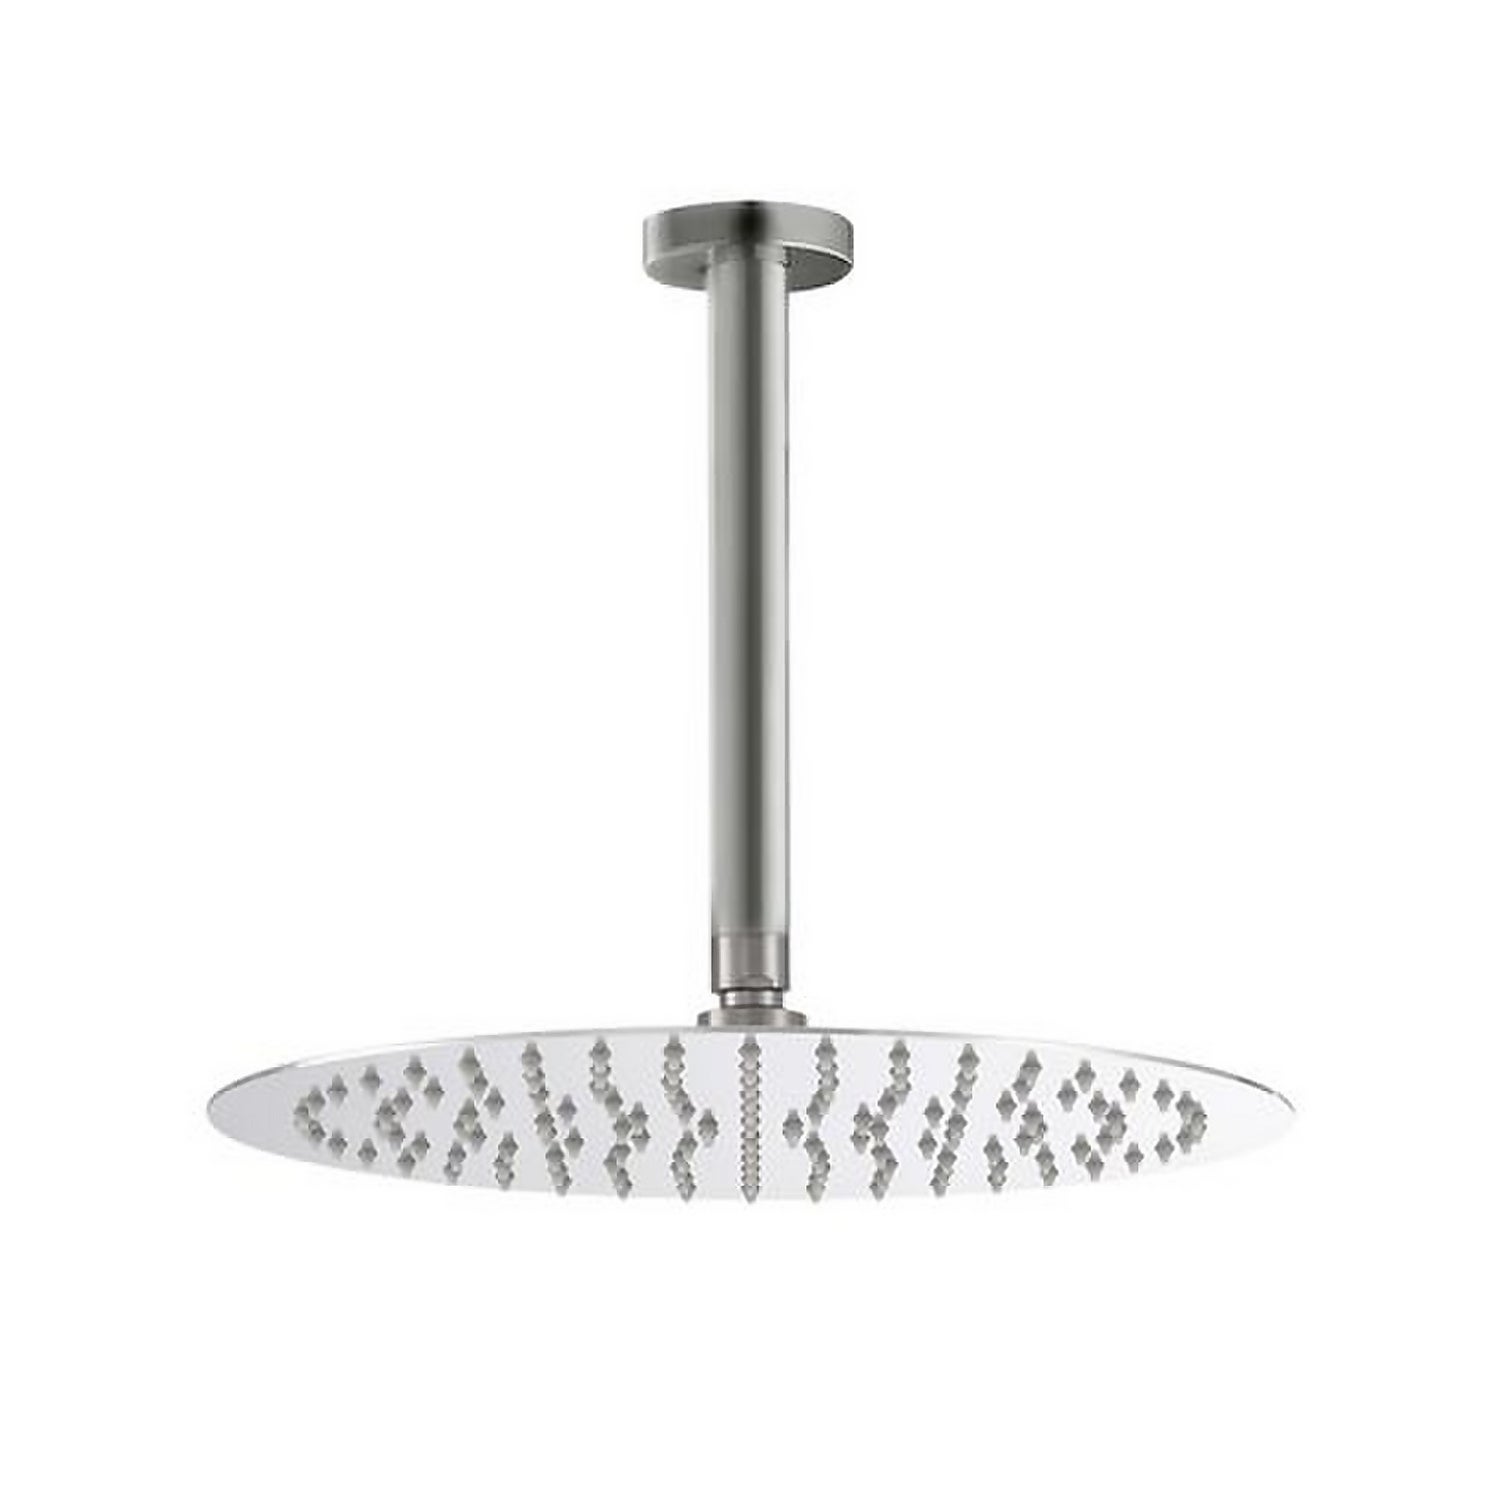 Forge 300mm Shower Head with Ceiling Arm - Stainless Steel